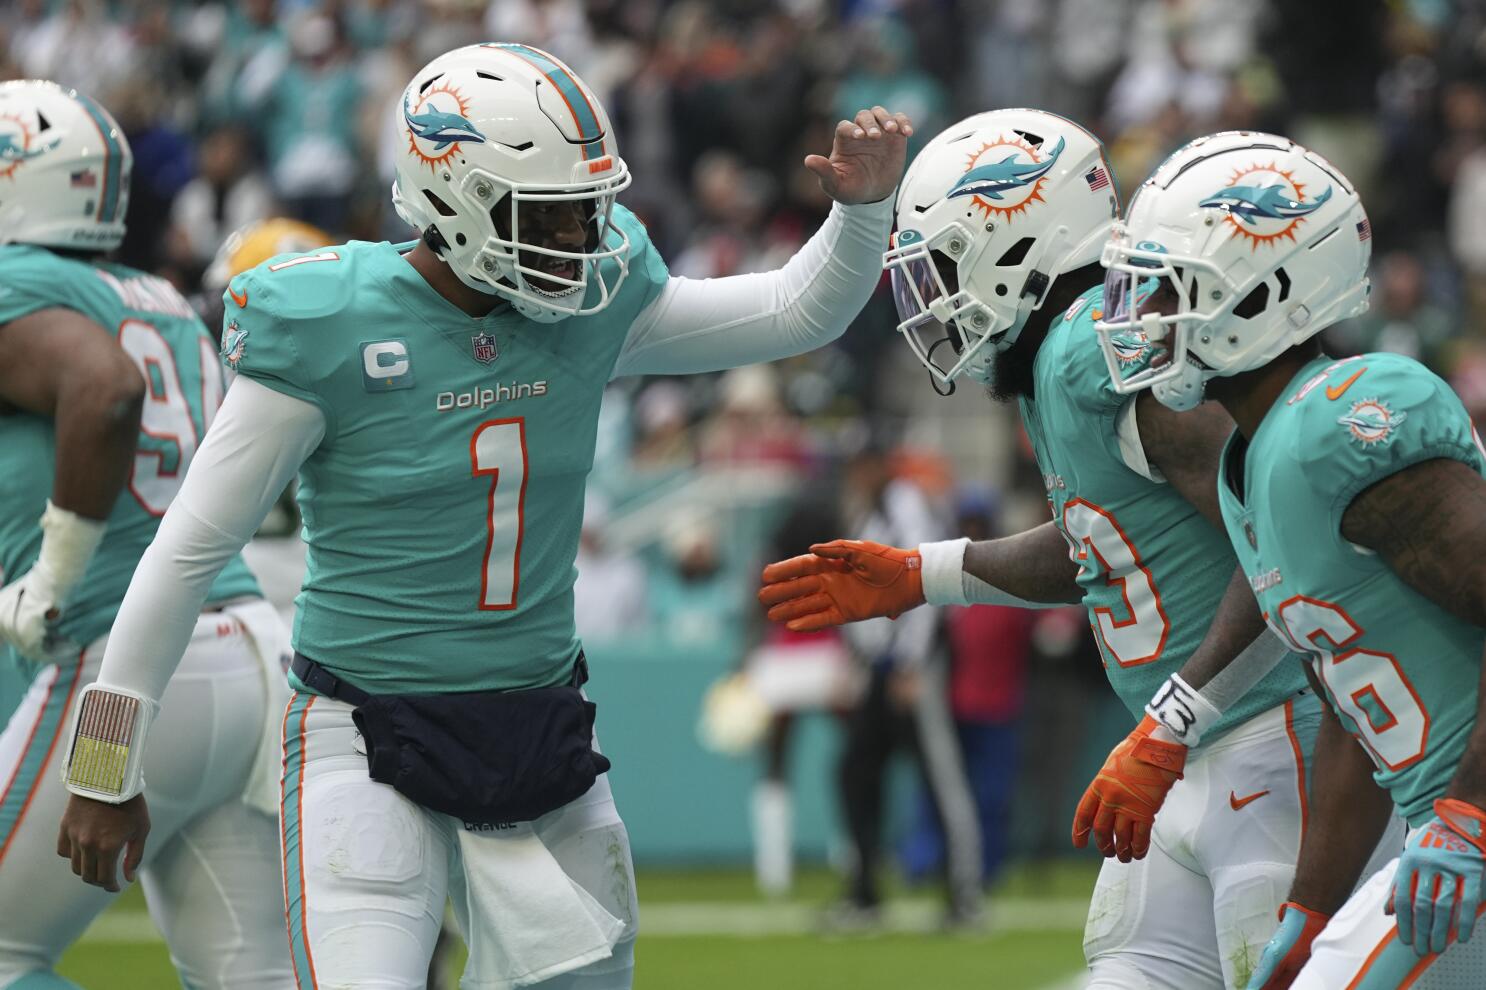 Dolphins, Patriots square off with playoff chances at stake - The